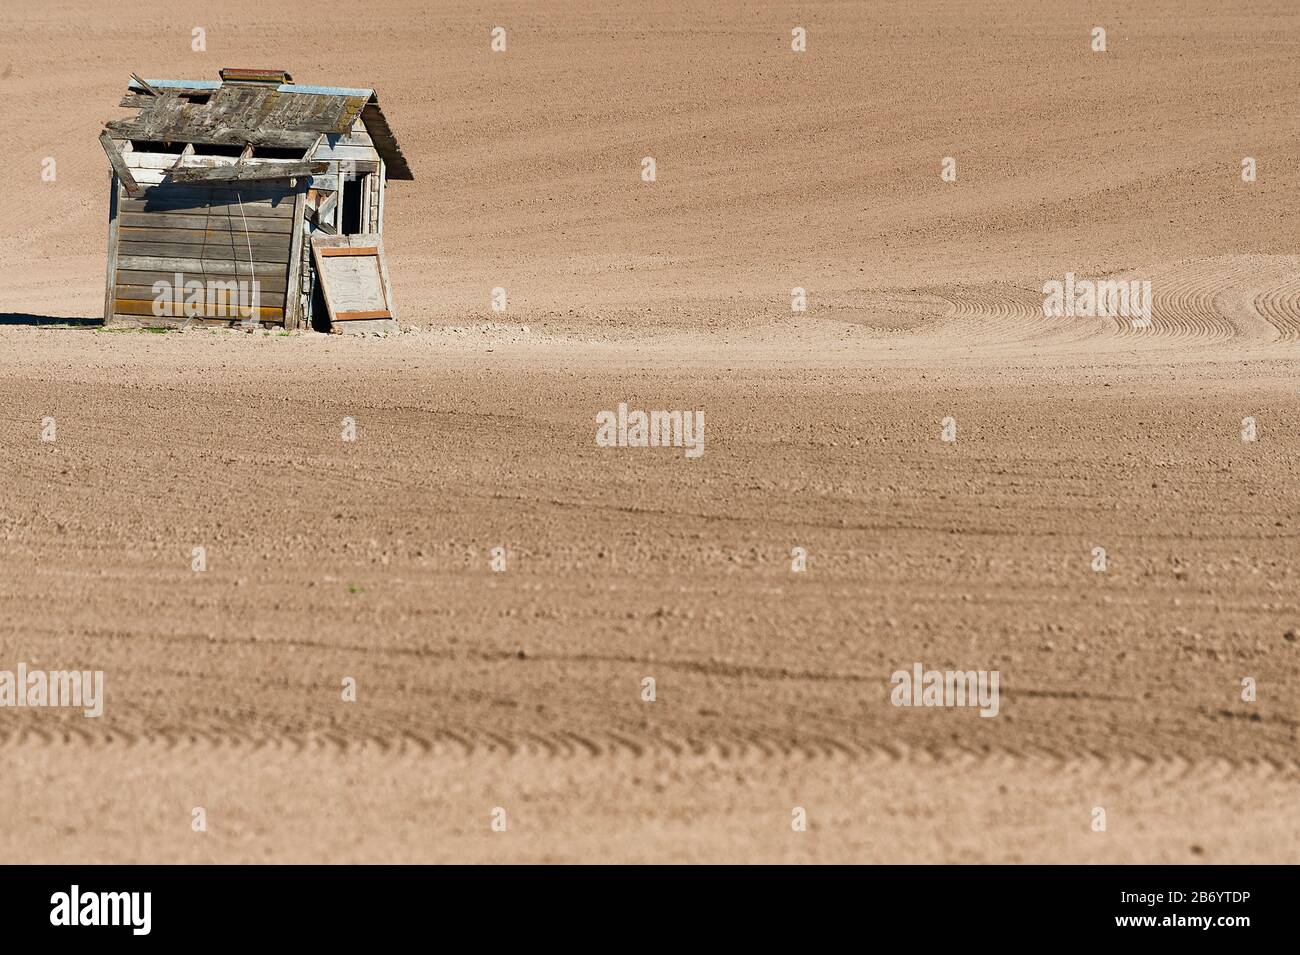 Freshly worked agricultural ground with a lone shack in this minimalist image. Stock Photo